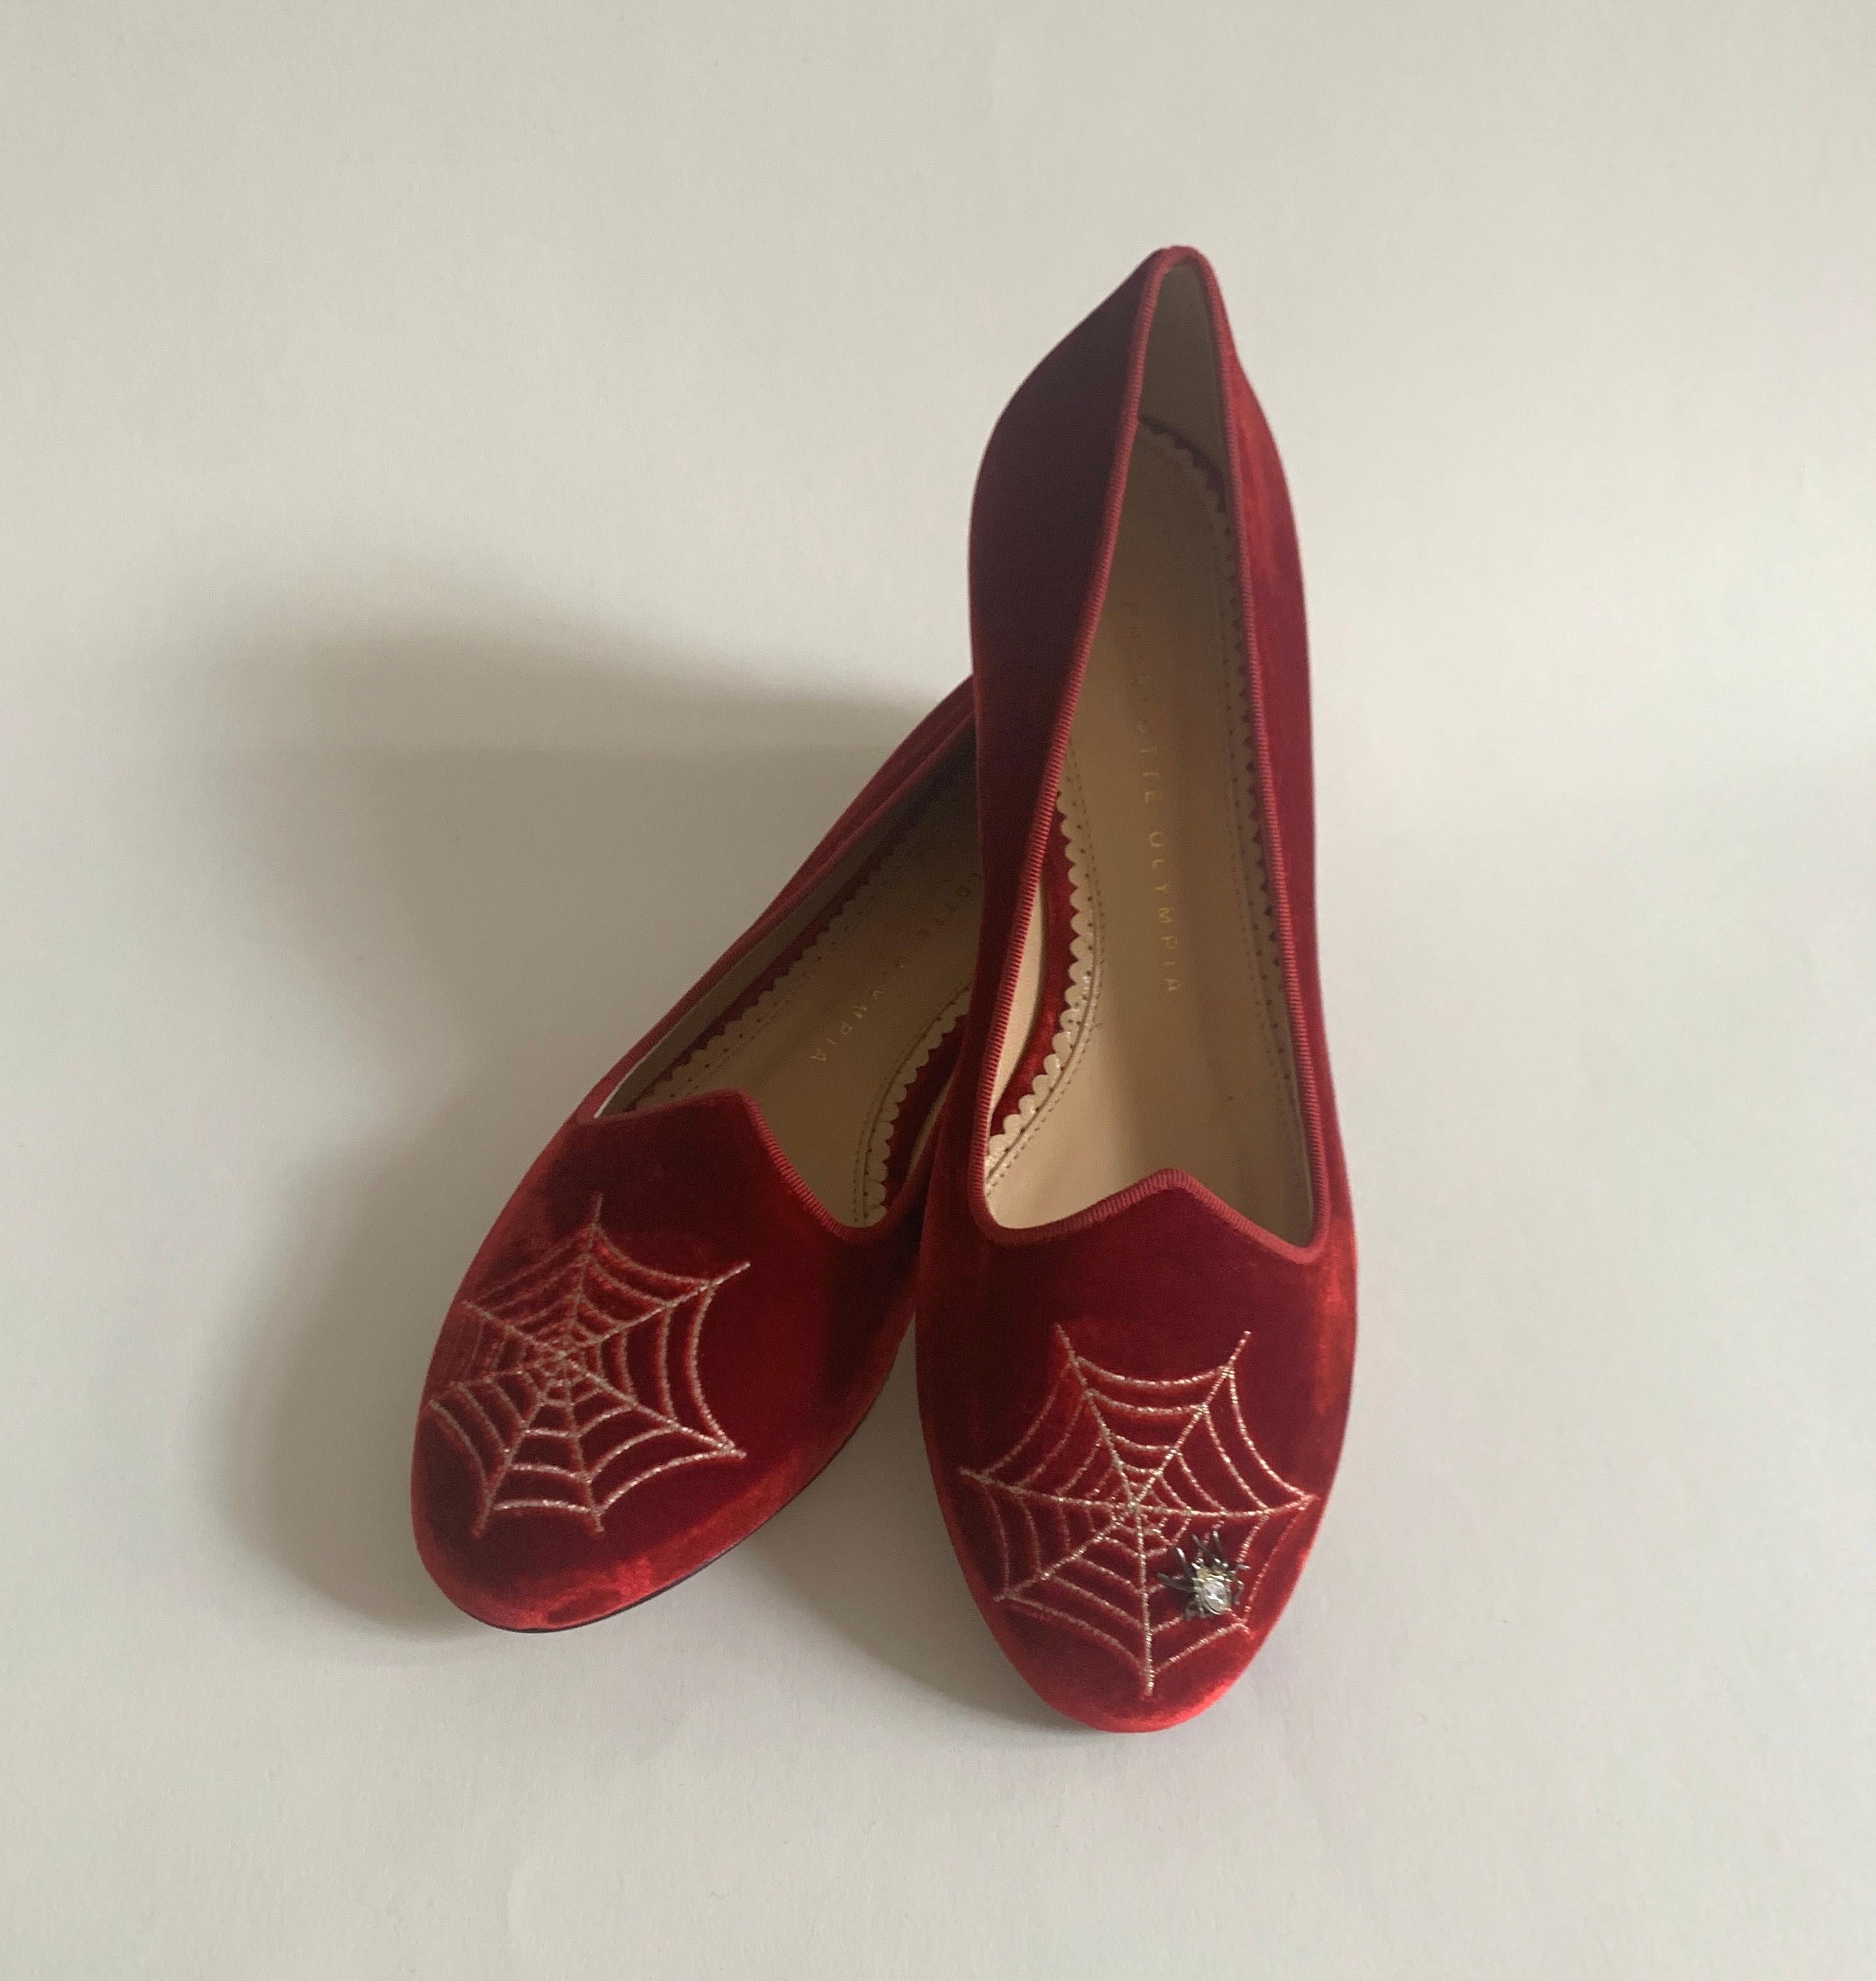 Charlotte Olympia red velvet flat features metallic spiderwebs in embroidered needlepoint at toes. A tiny spider with crystal embellishment creeps across one of the webs. Gold tone heel. Velvet slide with leather soles. Slide on. 

Made in